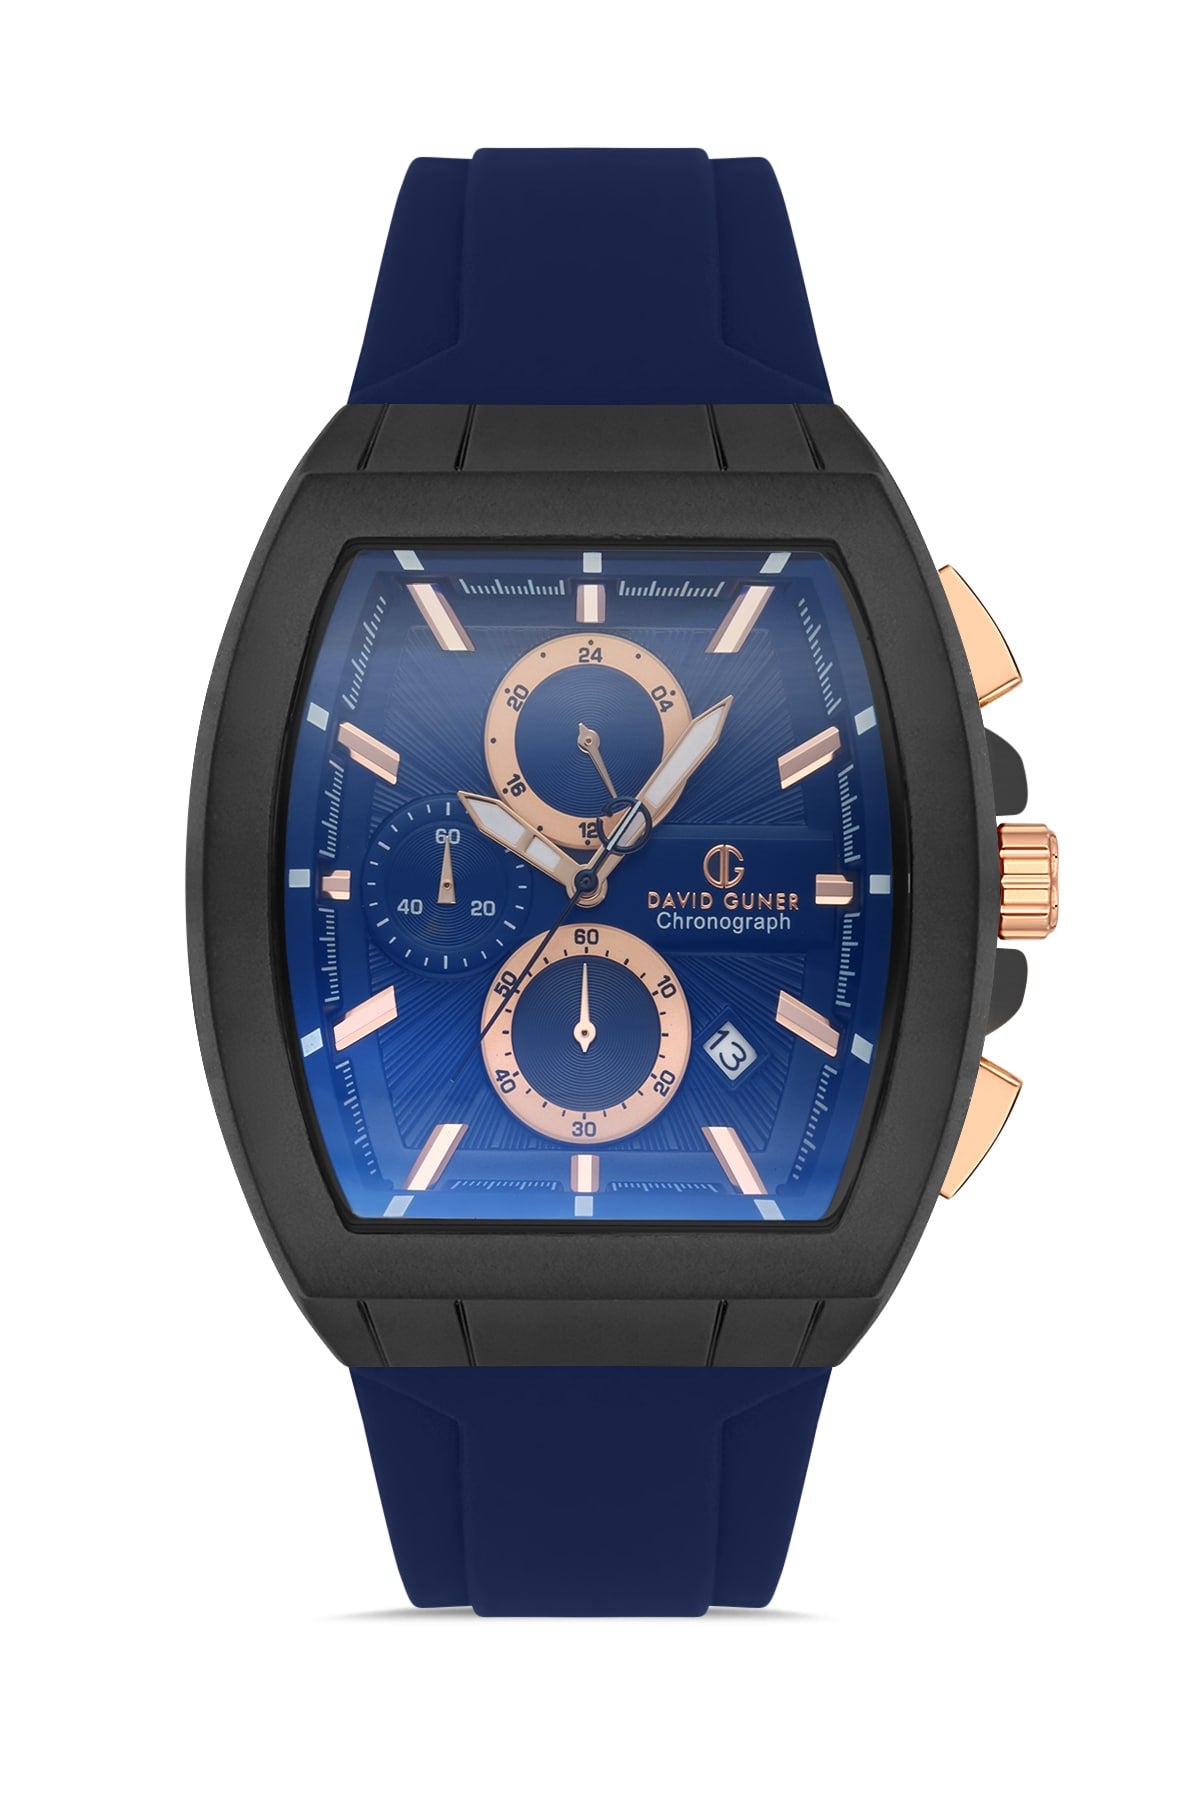 DAVID GUNER Men's Watch with Navy Blue Dial and Navy Blue Silicone Strap